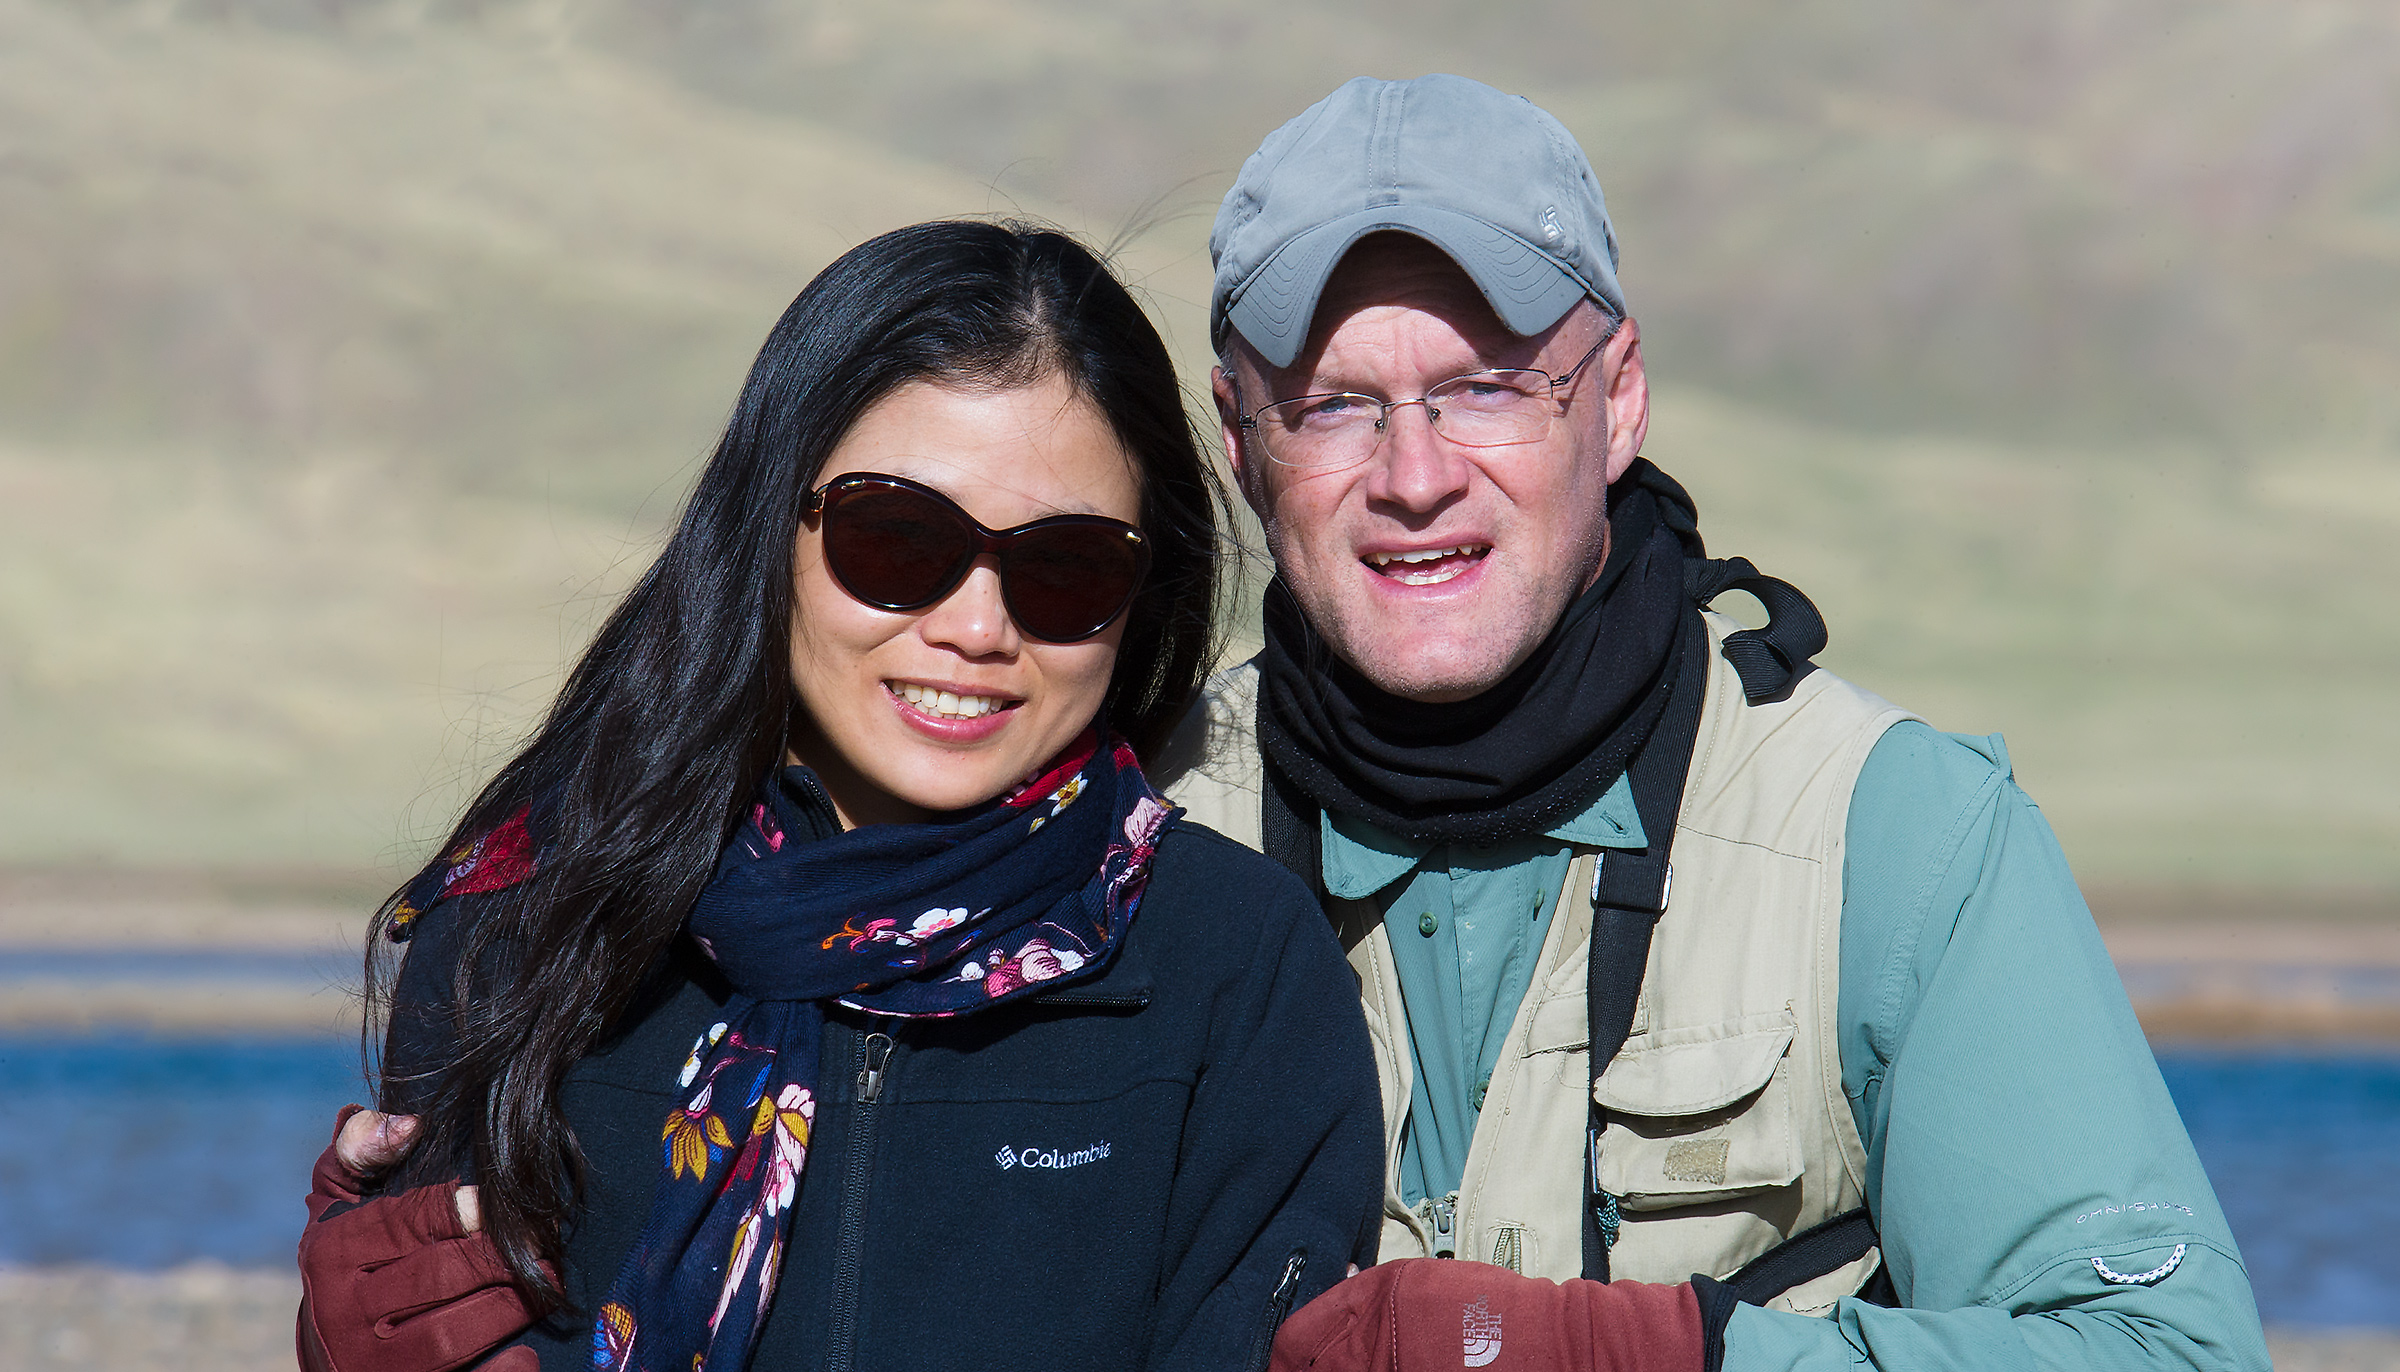 'We Are Family!' sang Sister Sledge back in '79. Here's the Chinese-American adventure team, Elaine Du (L) and yours truly--partners, spouses, family. Eling Lake, where the Yellow River and Chinese culture are born. 3 July 2016. Self-portrait taken with my Nikon D3S and 600 mm F/4 lens.